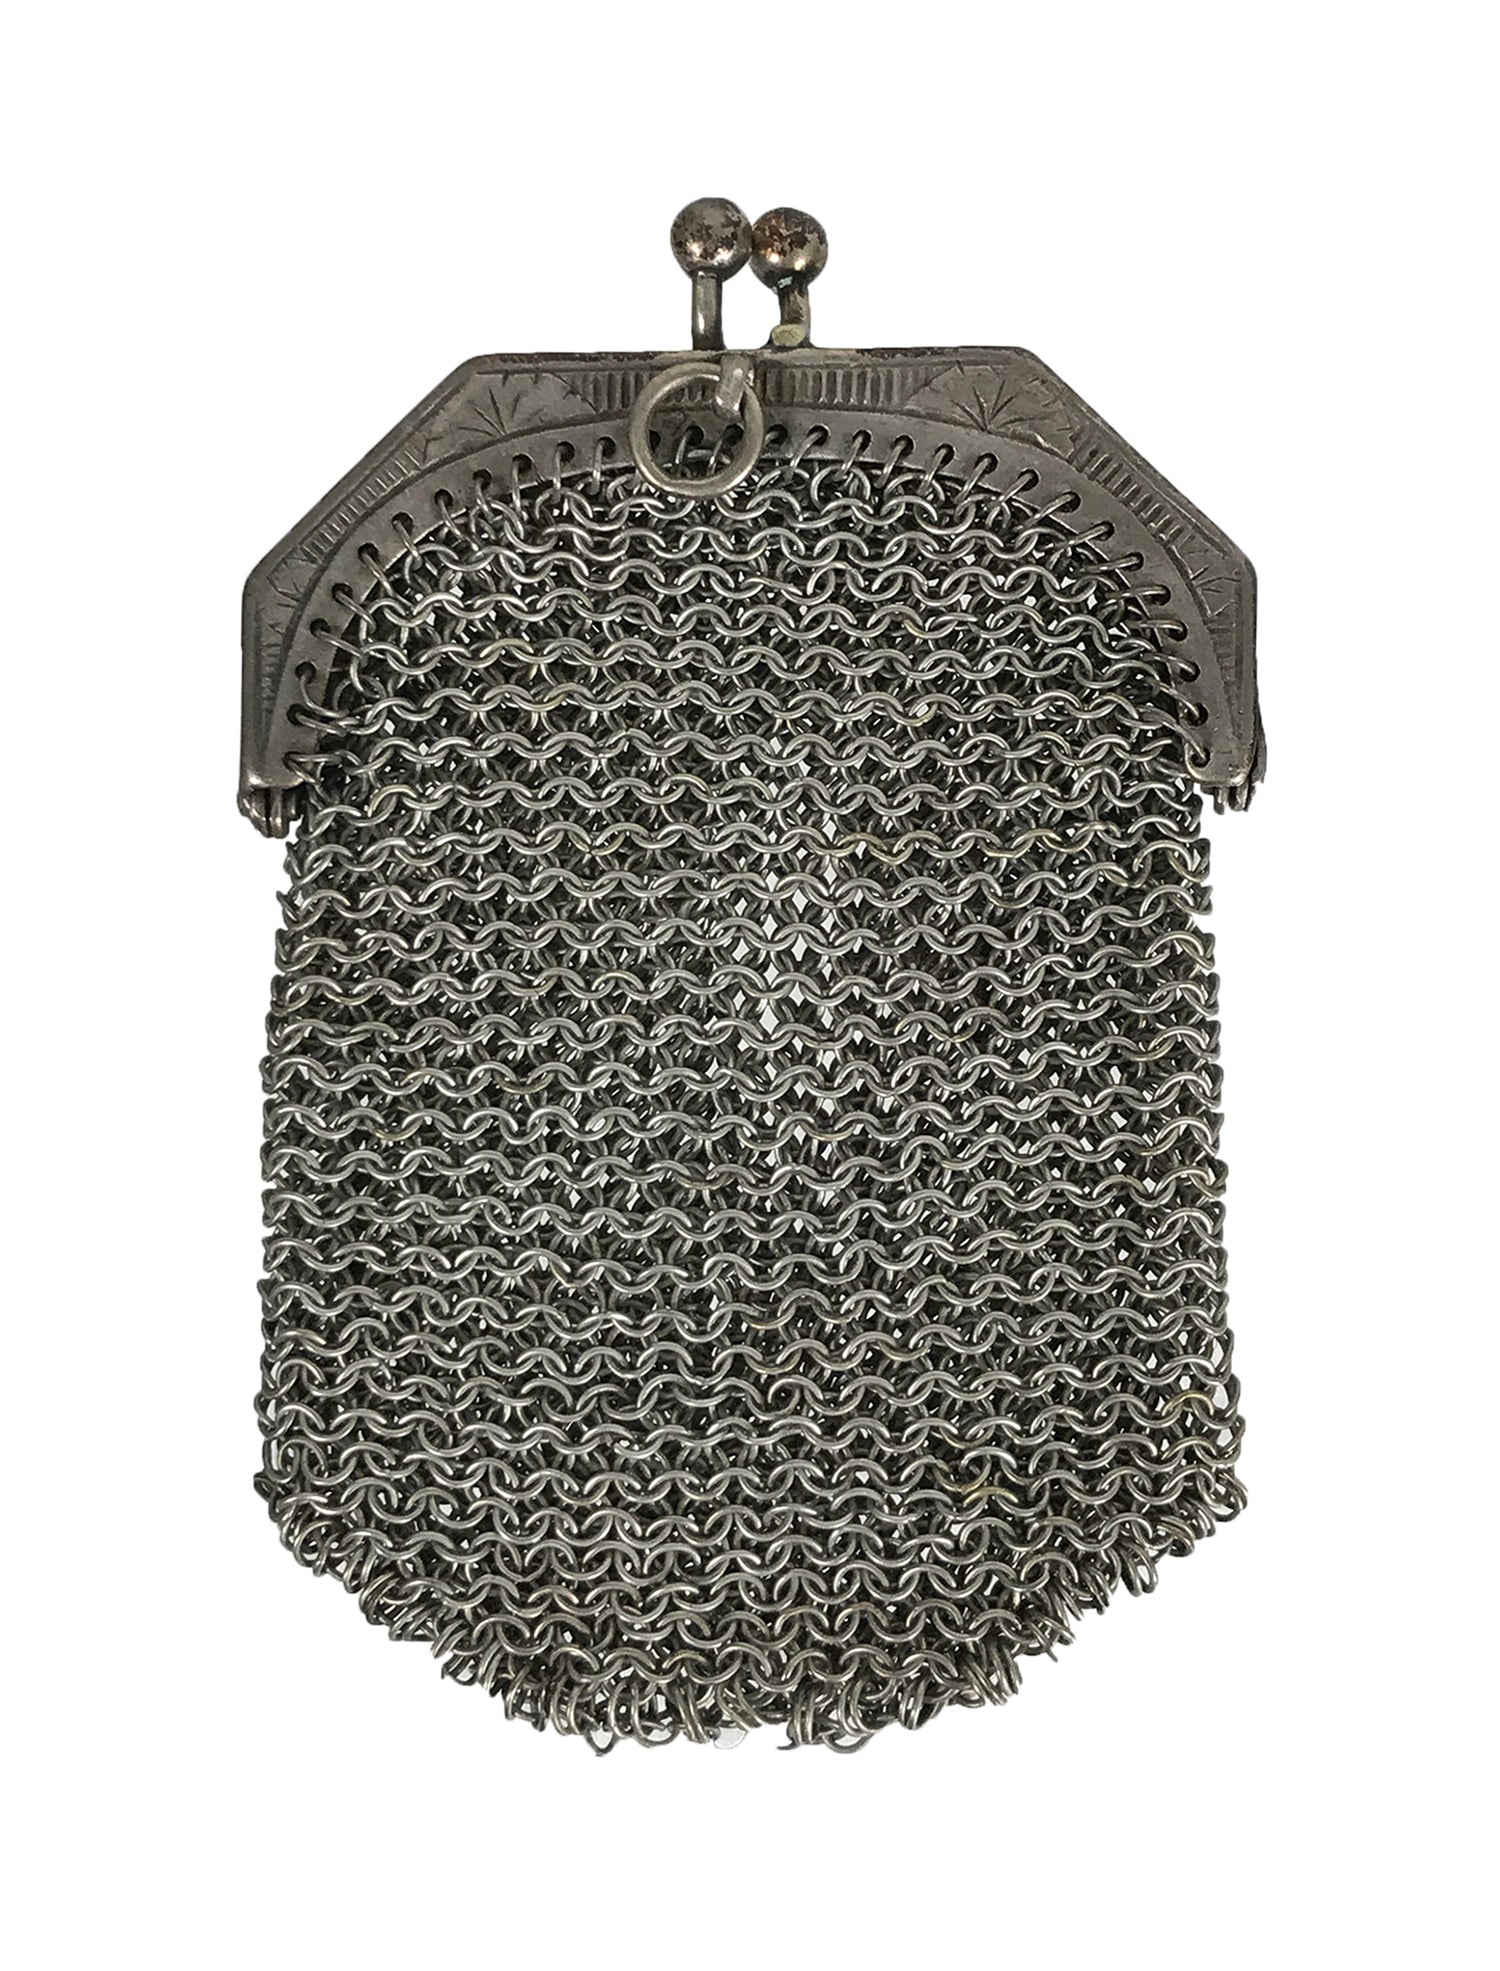 Buy Antique Silver Mesh Purse Lucky Token Online in India - Etsy